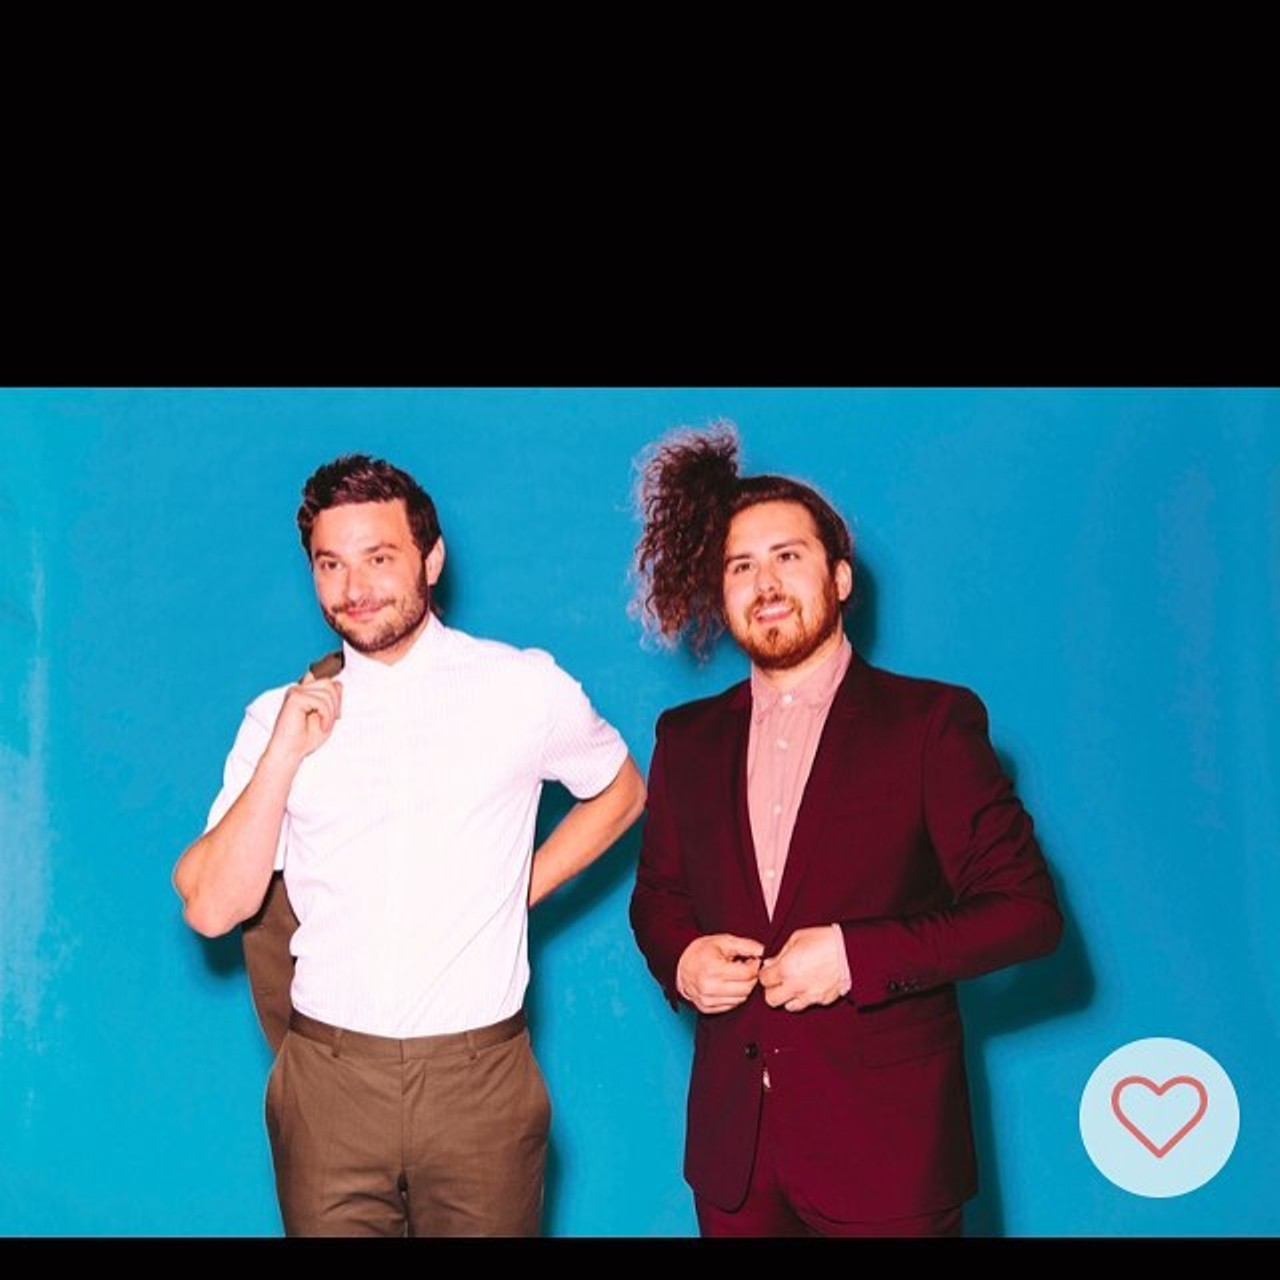 JR JR - Formerly known as Dale Earnhardt Jr Jr, the newly branded JR JR duo come from Royal Oak. Their brand of quaint indie lends to an easy listen perfect for the summer.
(Photo via JR JR's Instagram)